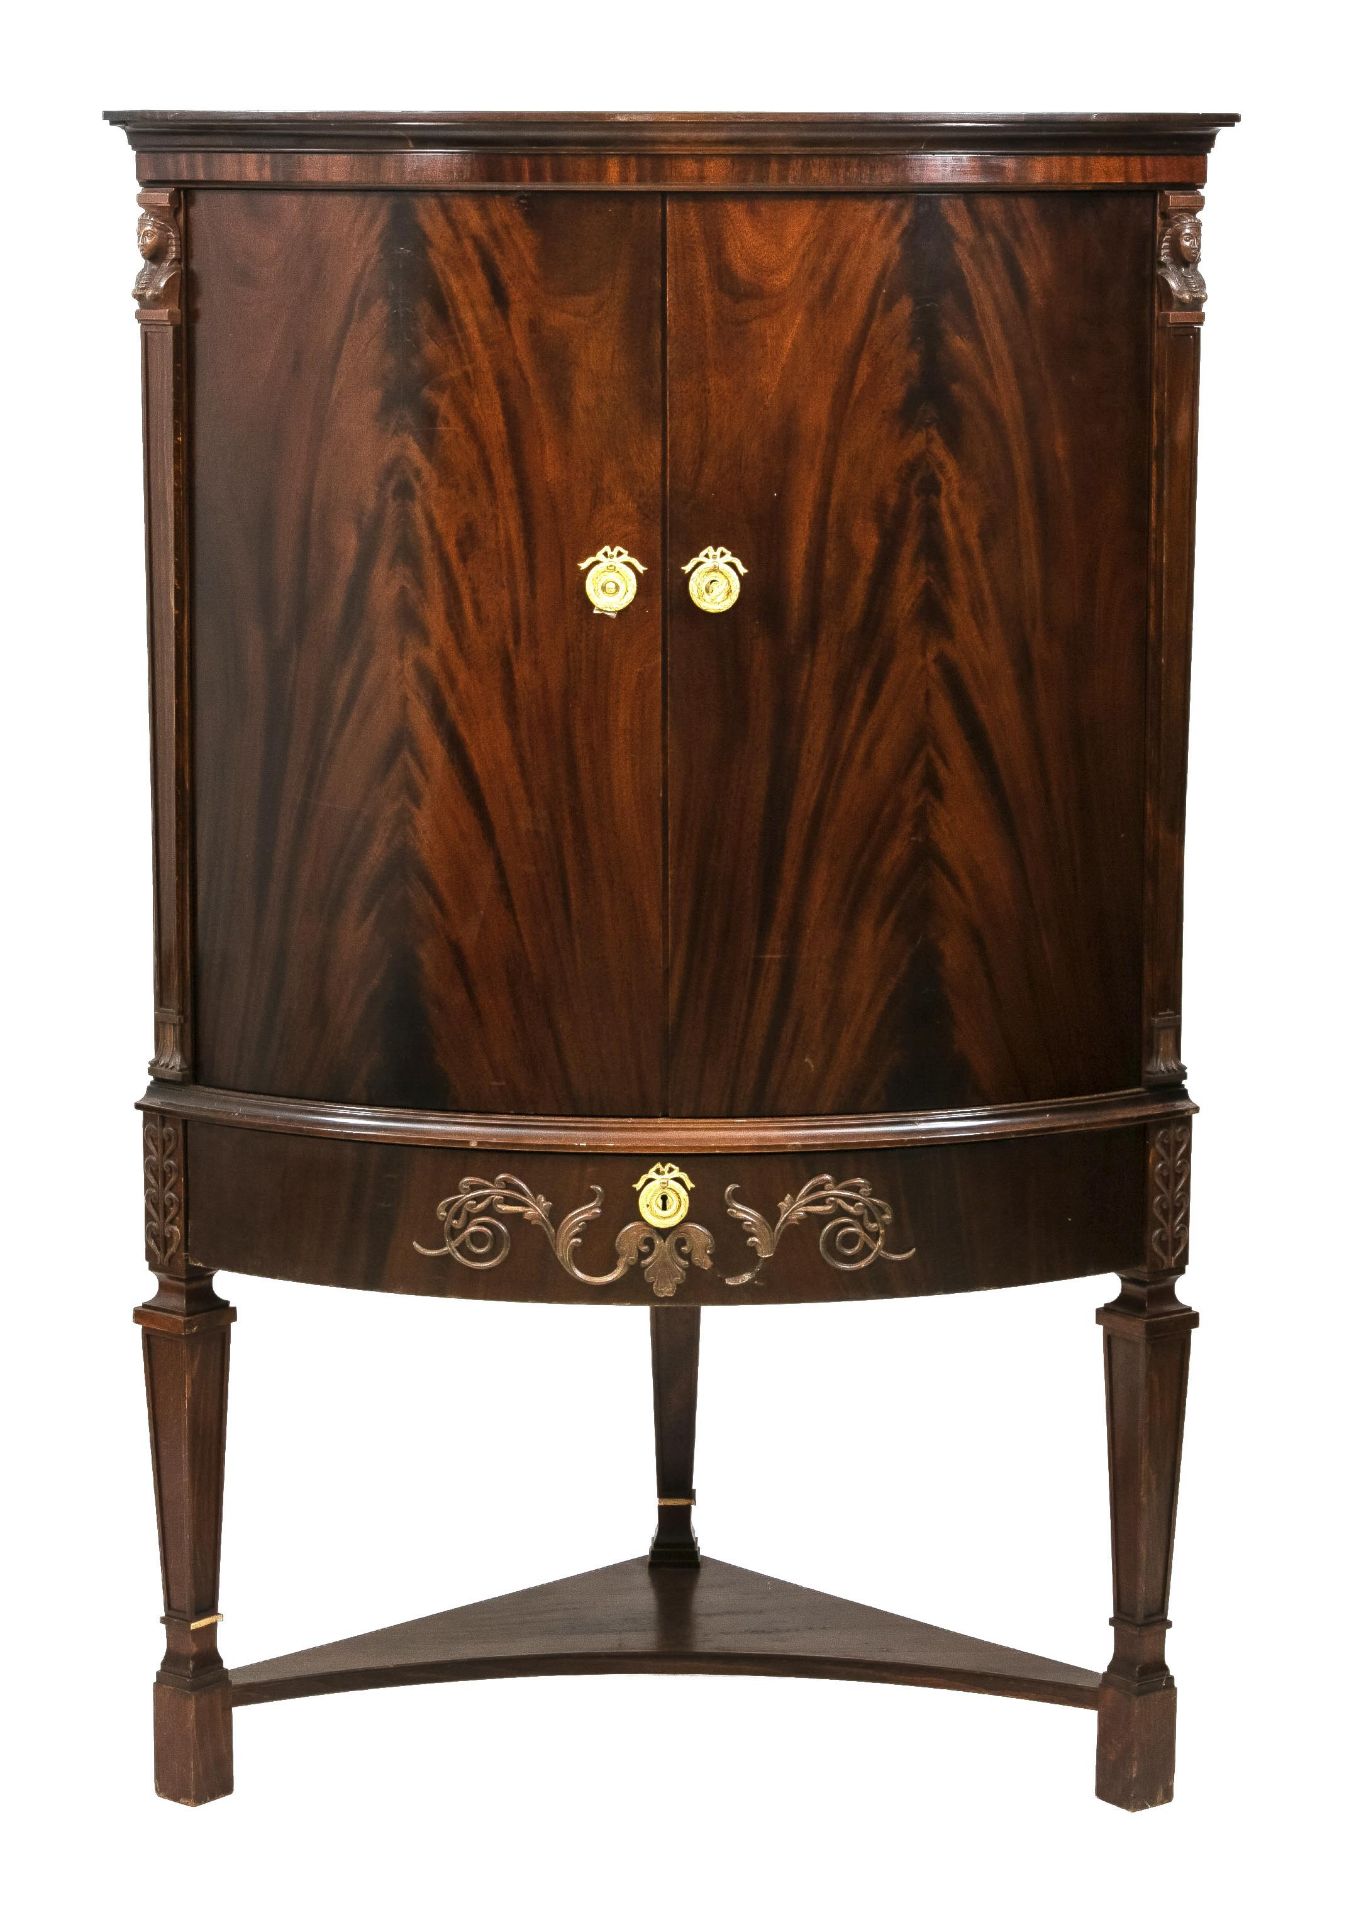 Empire style corner cabinet, 20th c., mahogany, slightly bulged doors flanked by carved caryatids,